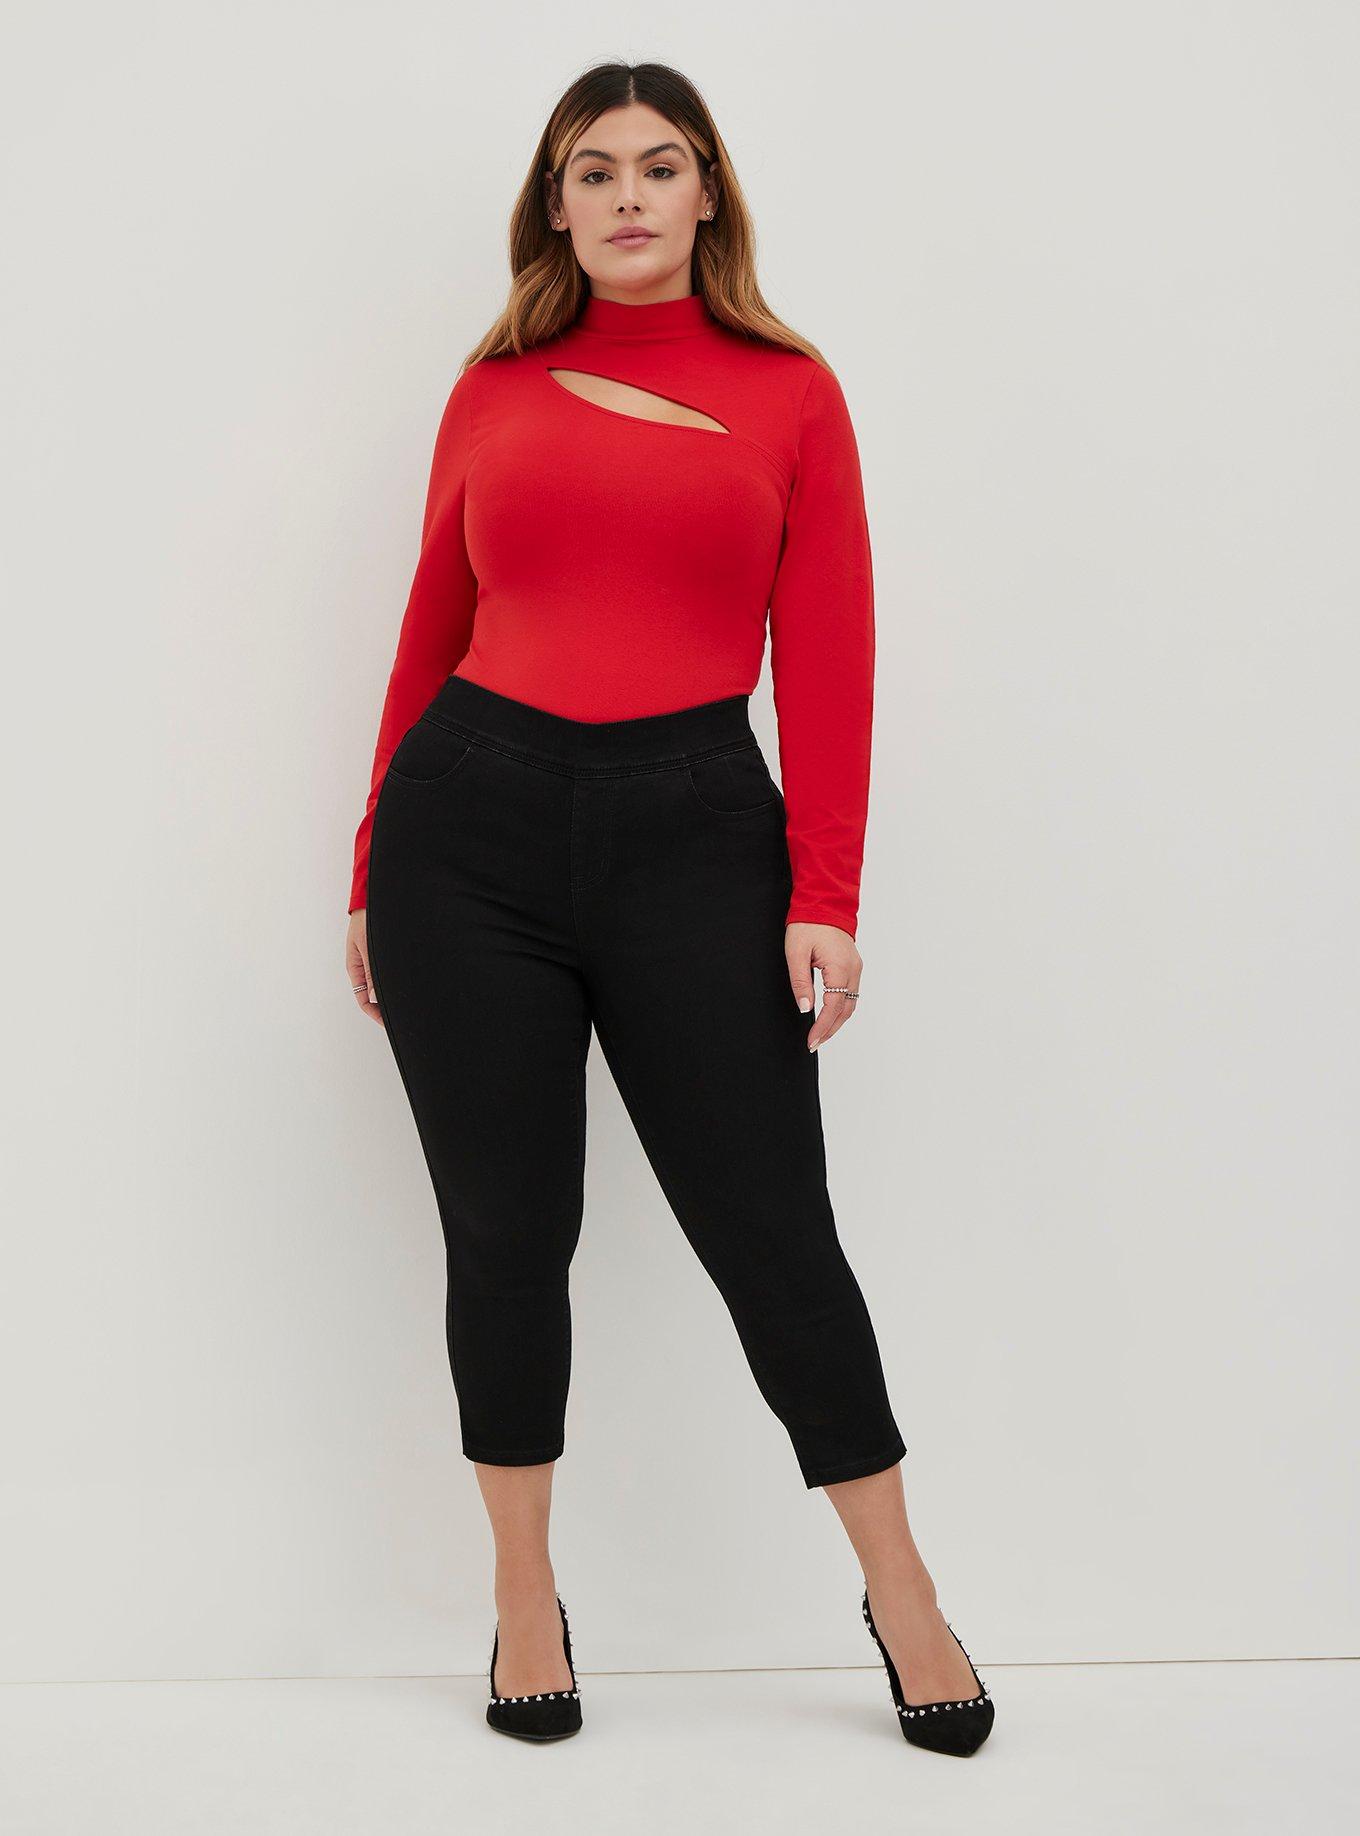 Sizing help! The 8 was tight in my hips/butt but the 10 was baggy in my  waist and crotch. Which should I get? : r/lululemon